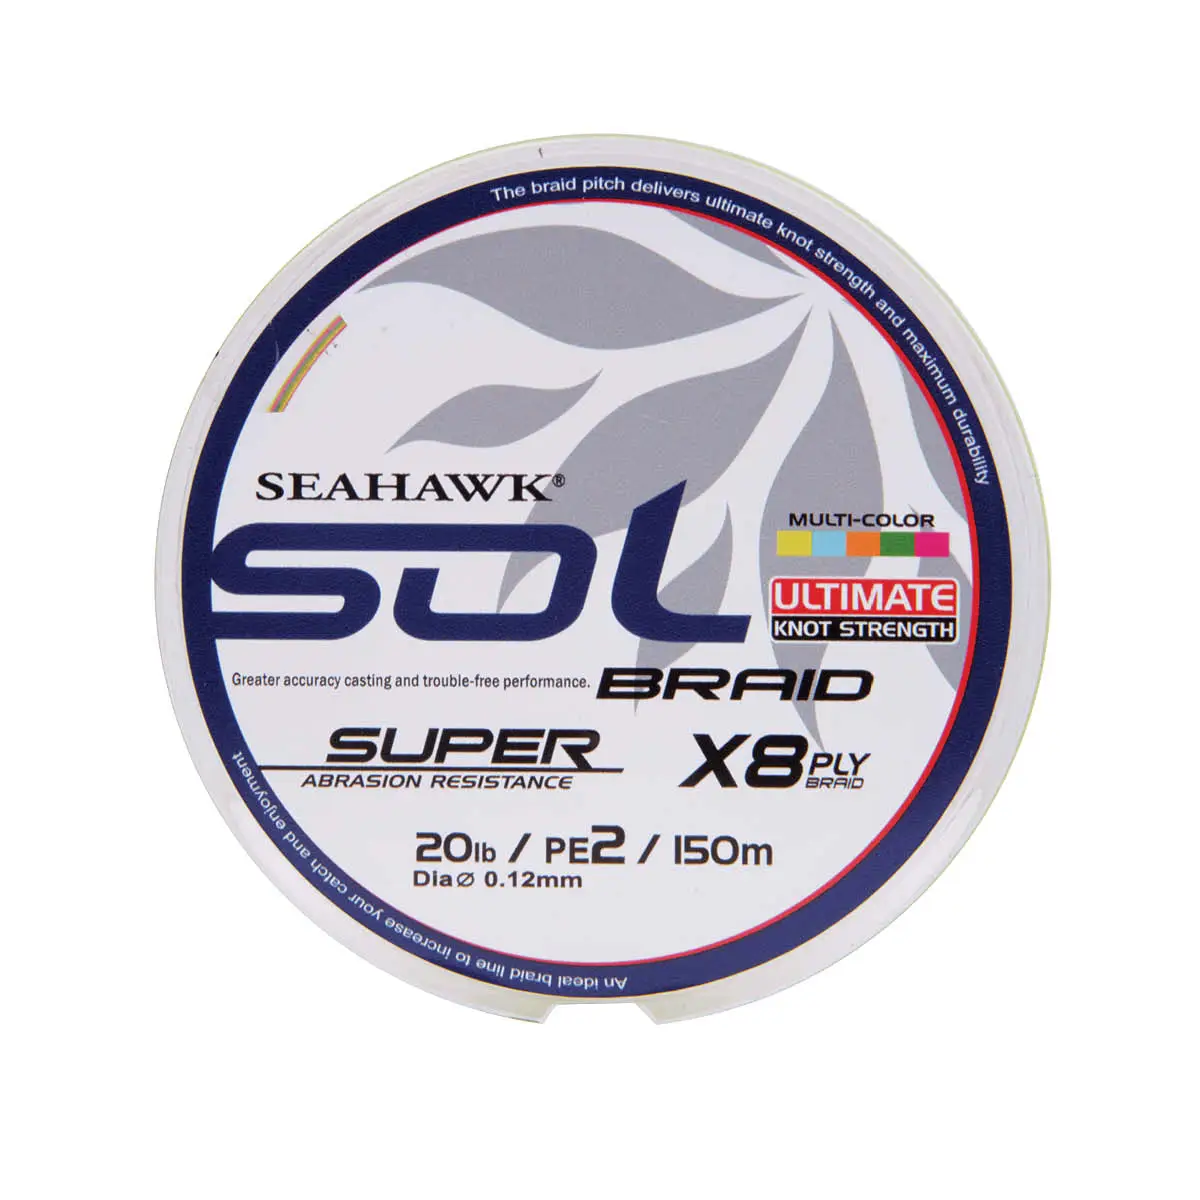 Chief Angler Saltwater and Freshwater PE Braided Fishing Line